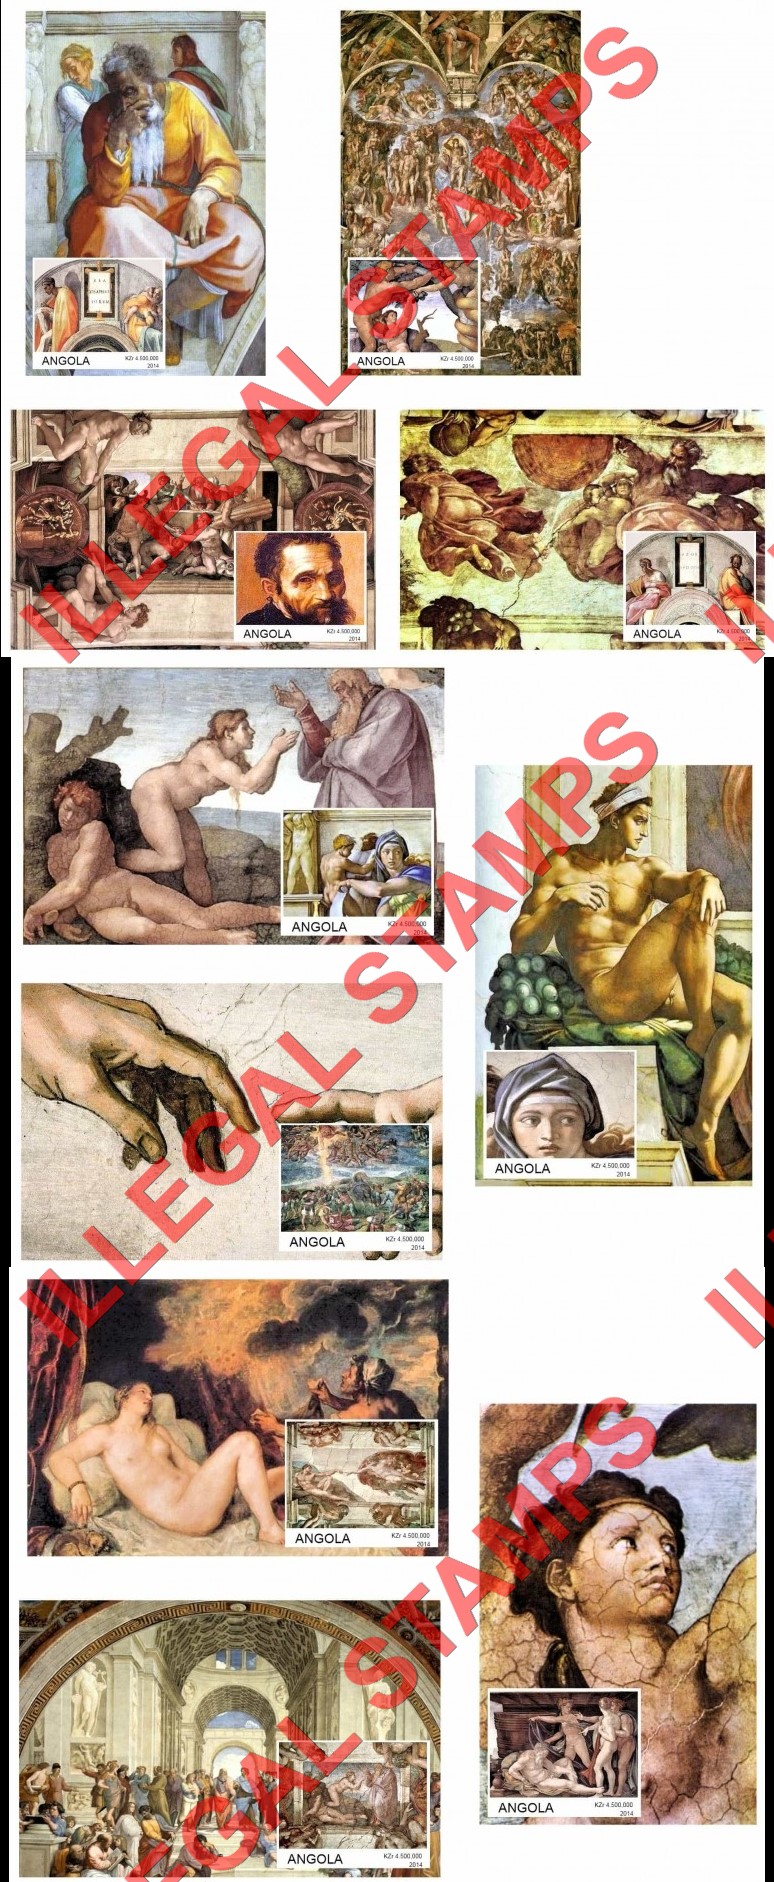 Angola 2014 Paintings by Michelangelo Buonarroti Illegal Stamp Souvenir Sheets of 1 (Part 2)